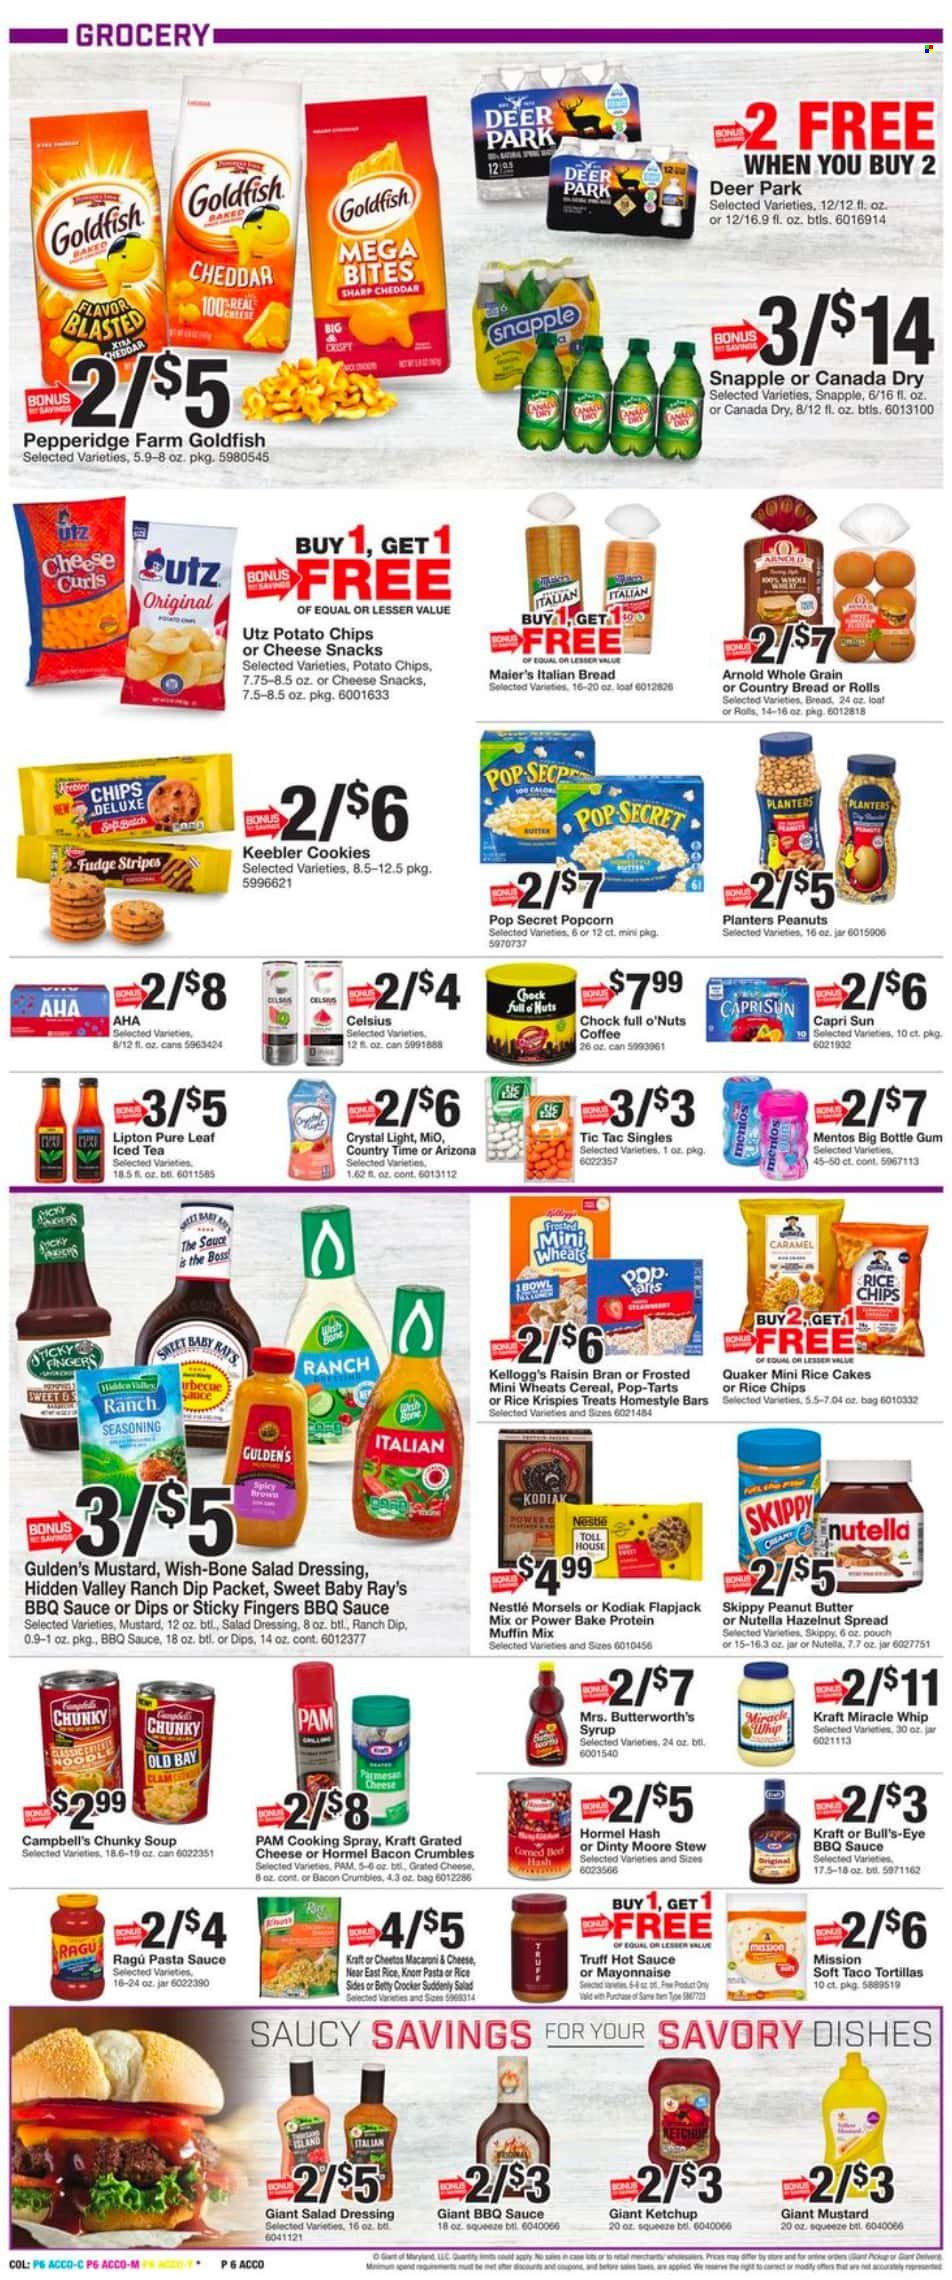 thumbnail - Giant Food Flyer - 05/26/2023 - 06/01/2023 - Sales products - tortillas, muffin mix, clams, Campbell's, macaroni & cheese, pasta sauce, soup, sauce, Quaker, Kraft®, Hormel, ragú pasta, snack, parmesan, grated cheese, mayonnaise, Miracle Whip, dip, cookies, fudge, Nestlé, Nutella, Mentos, Kellogg's, Tic Tac, Pop-Tarts, Keebler, potato chips, Cheetos, chips, popcorn, Goldfish, salty snack, cereals, Rice Krispies, Raisin Bran, spice, BBQ sauce, caramel, mustard, salad dressing, hot sauce, ketchup, dressing, ragu, cooking spray, peanut butter, syrup, hazelnut spread, peanuts, Planters, Canada Dry, Capri Sun, Lipton, fruit drink, ice tea, AriZona, Snapple, Country Time, Pure Leaf, coffee, bowl. Page 8.